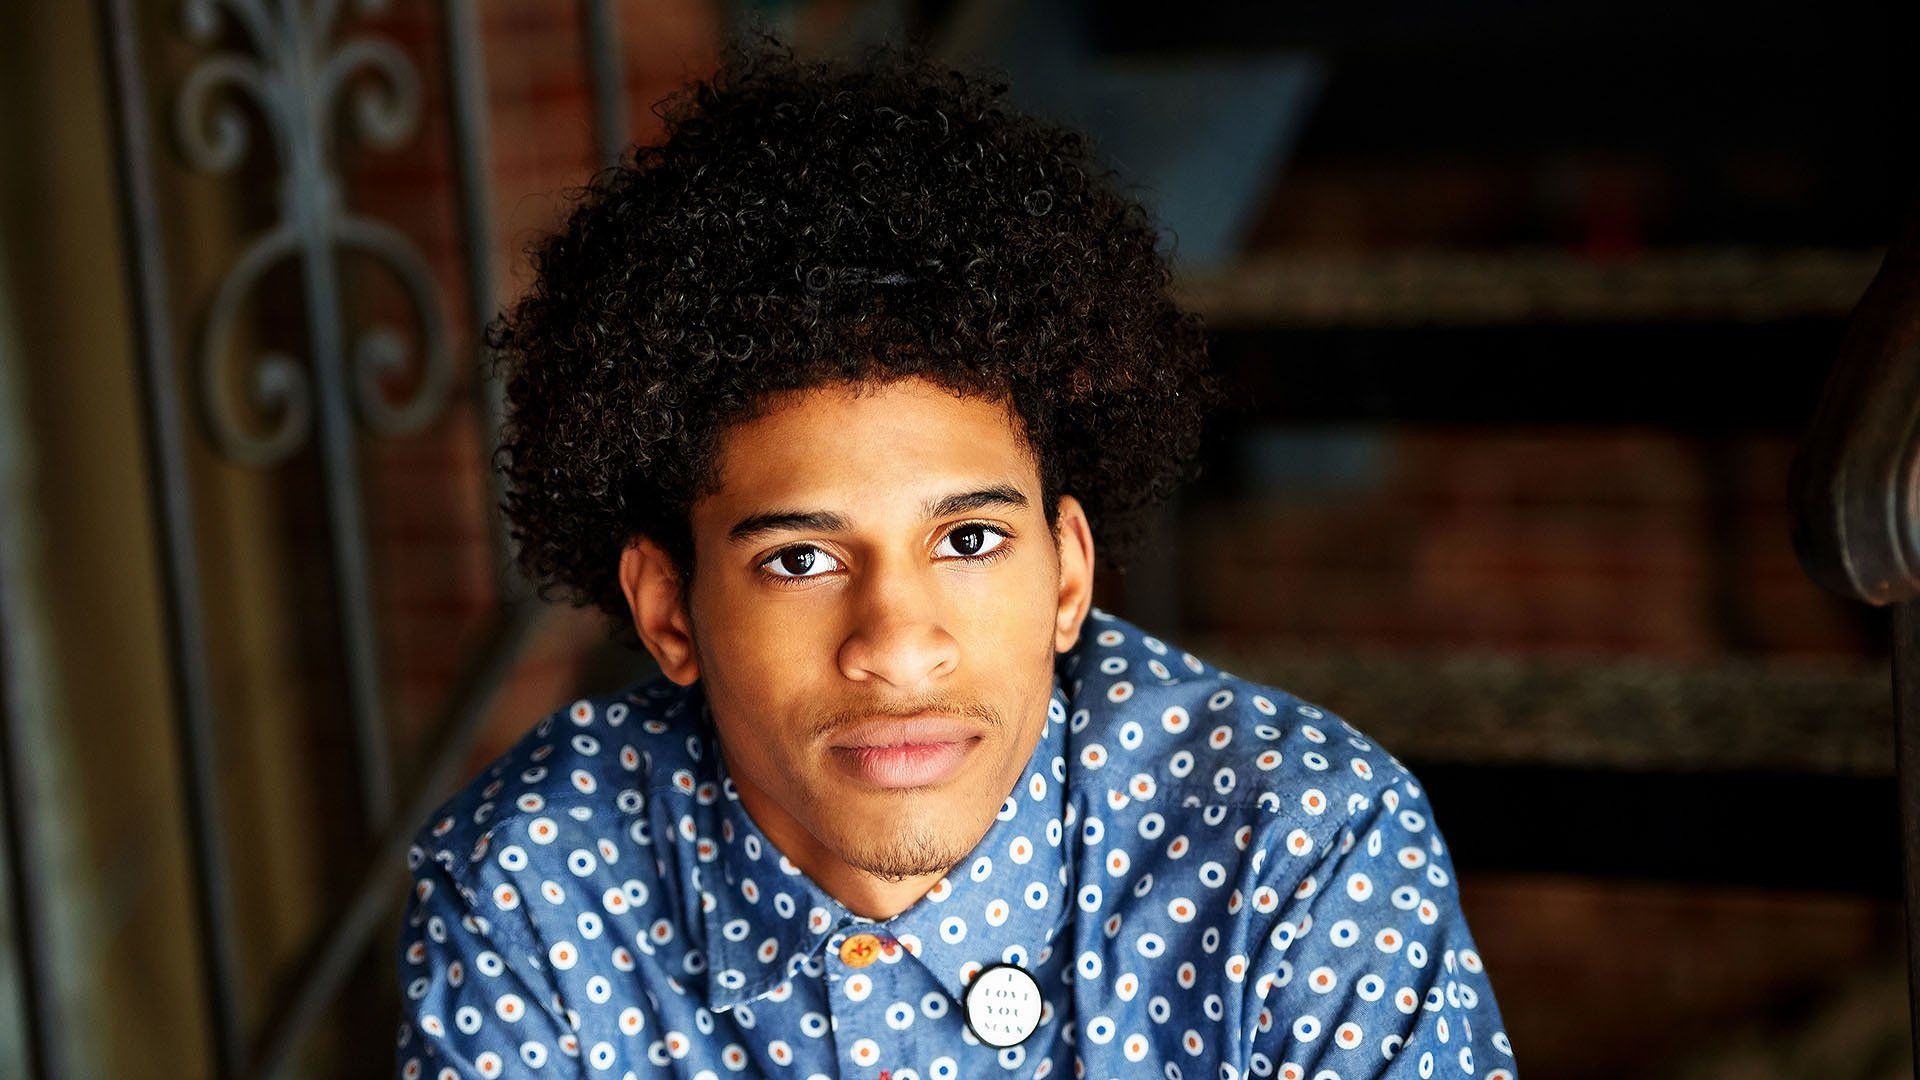 A young man with curly hair is sitting on a set of stairs.